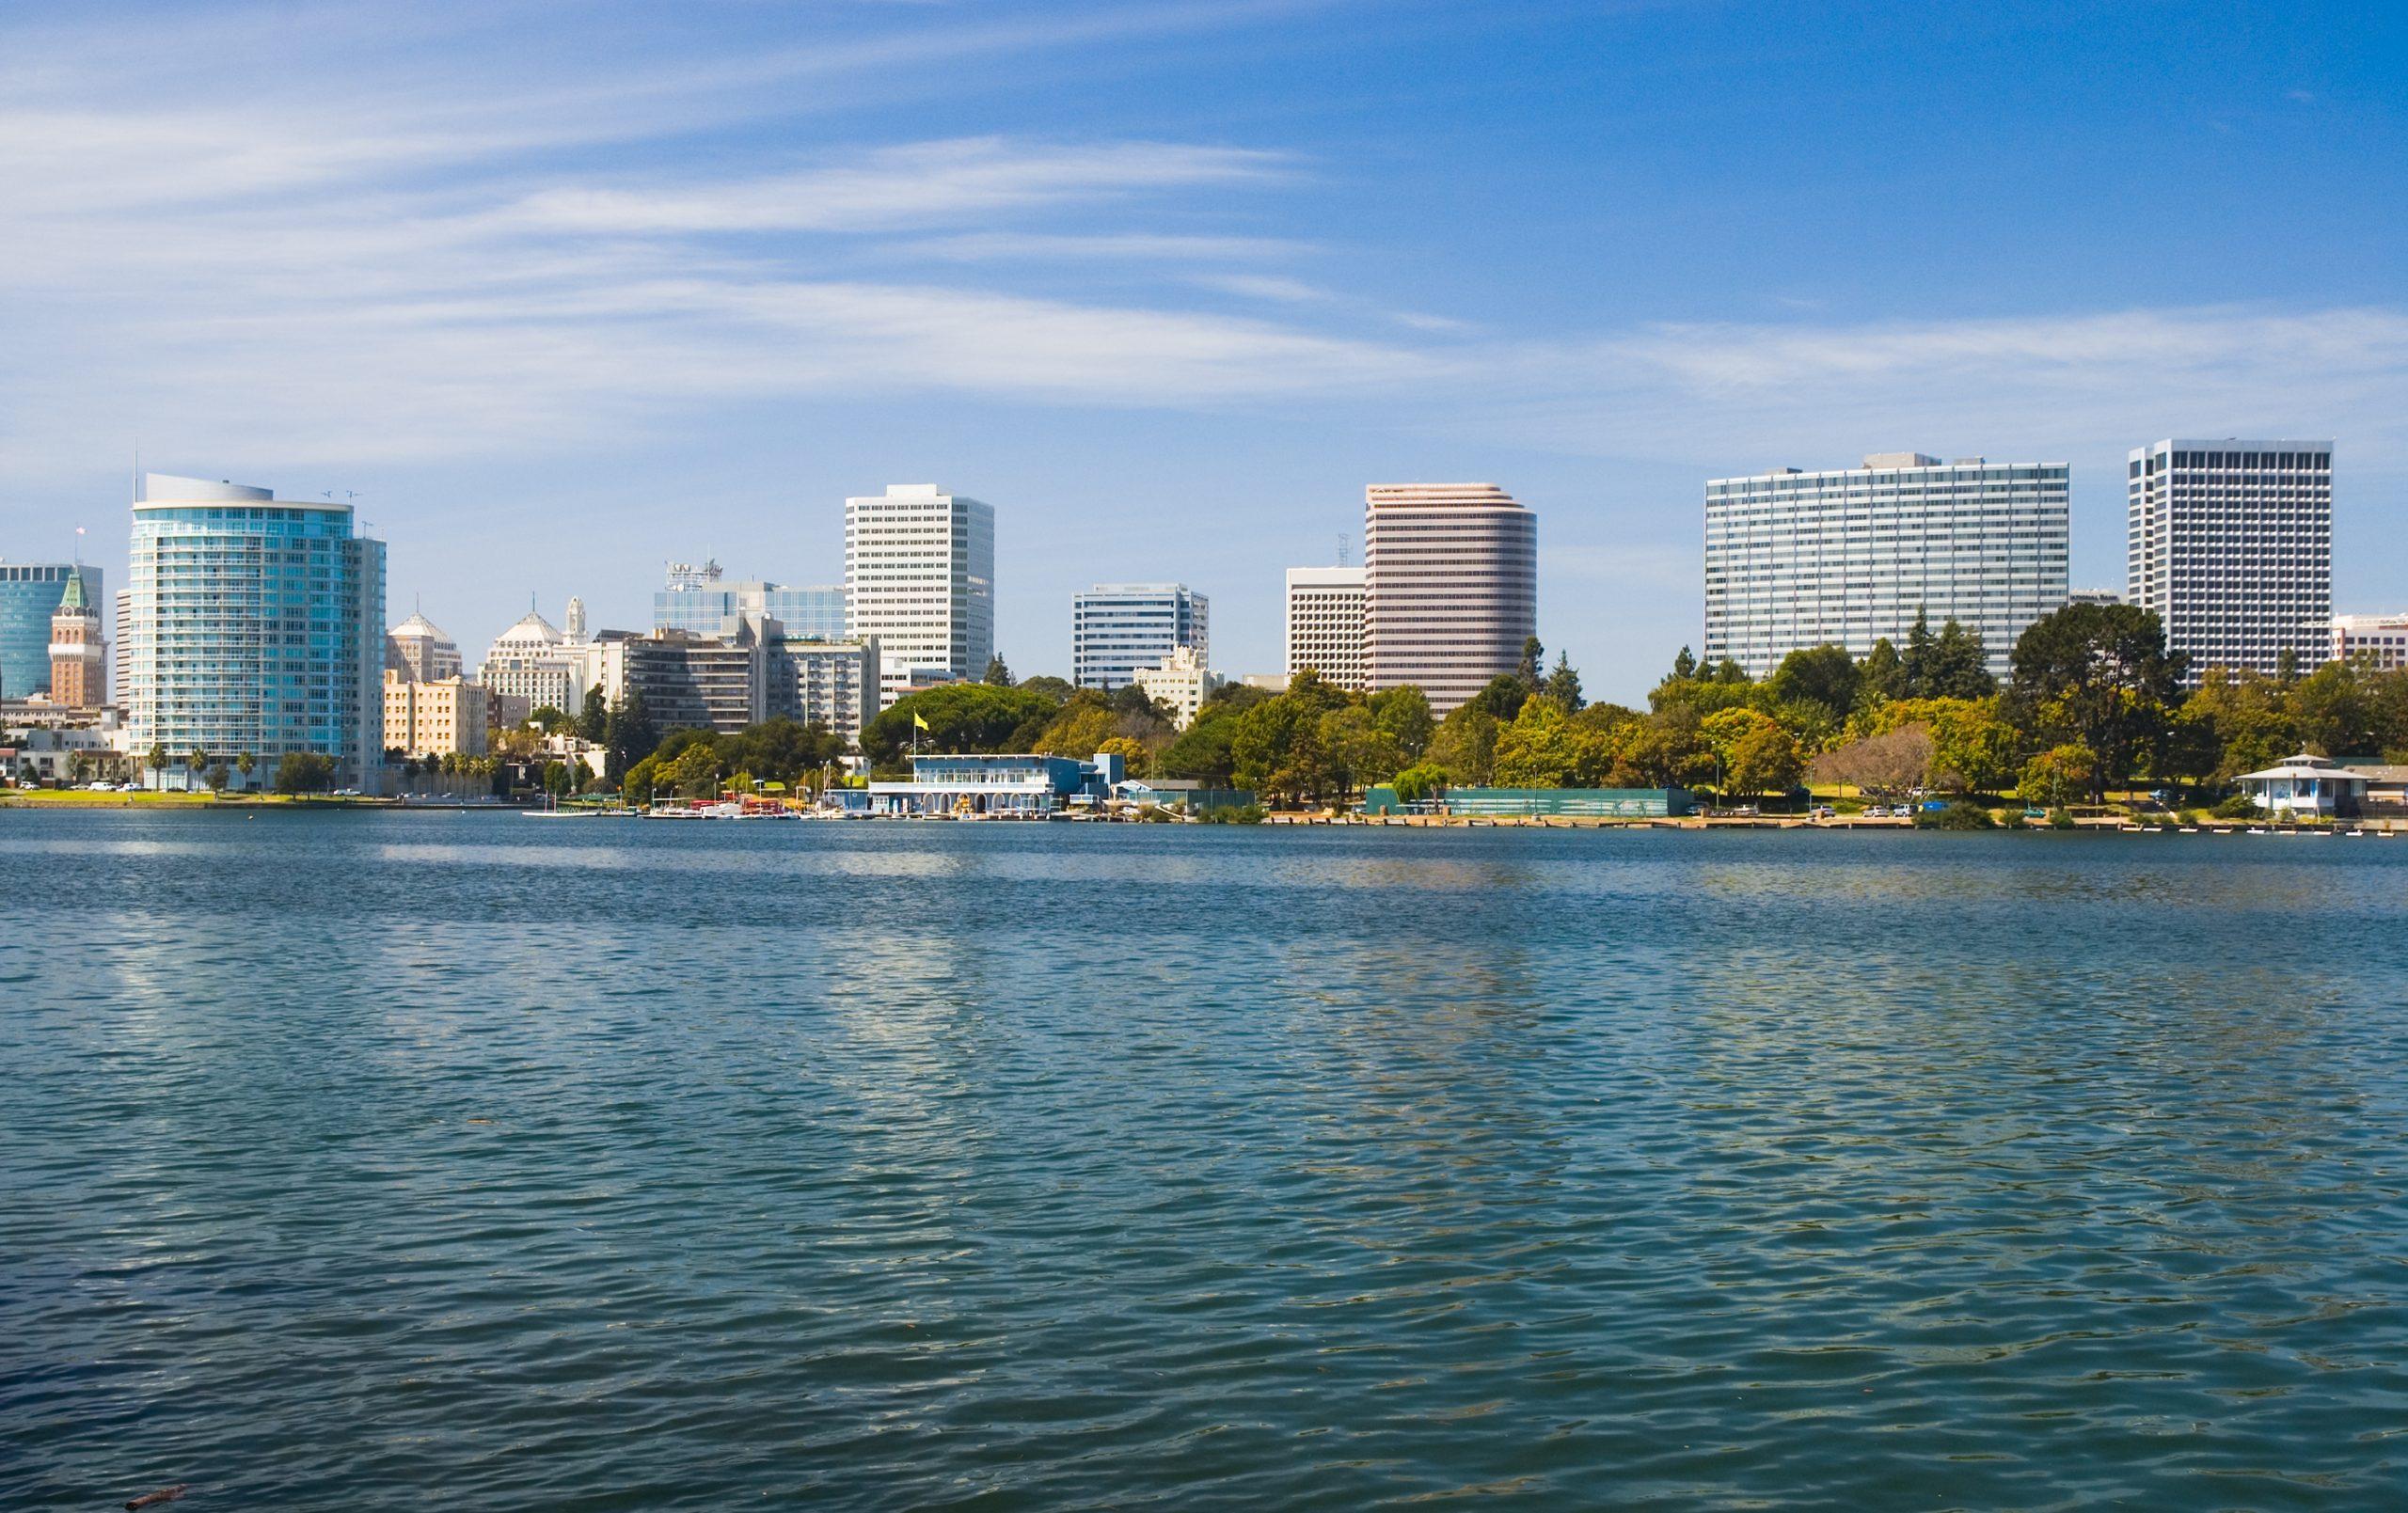 Oakland Downtown skyline with Lake Merritt in the foreground.